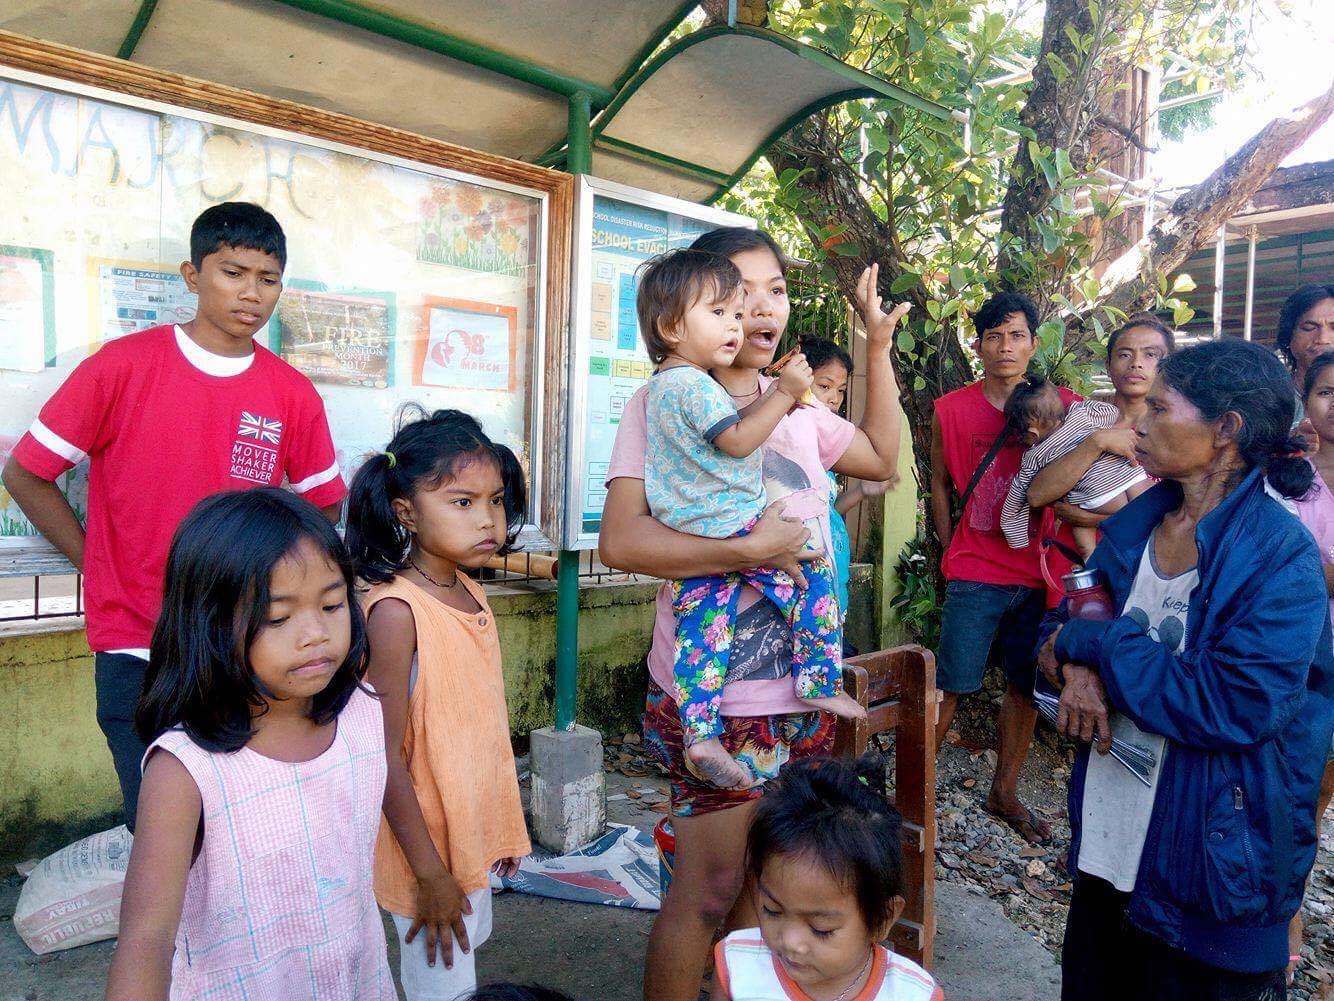 Some residents opt to remain in the evacuation center in public schools like Nabuad Elementary School while waiting for the end of the fighting between suspected members of Abu Sayyaf and government troopers in nearby Barangay Napo, INabanga town, Bohol. (INQUIRER PHOTO/LEO UDTOHAN)